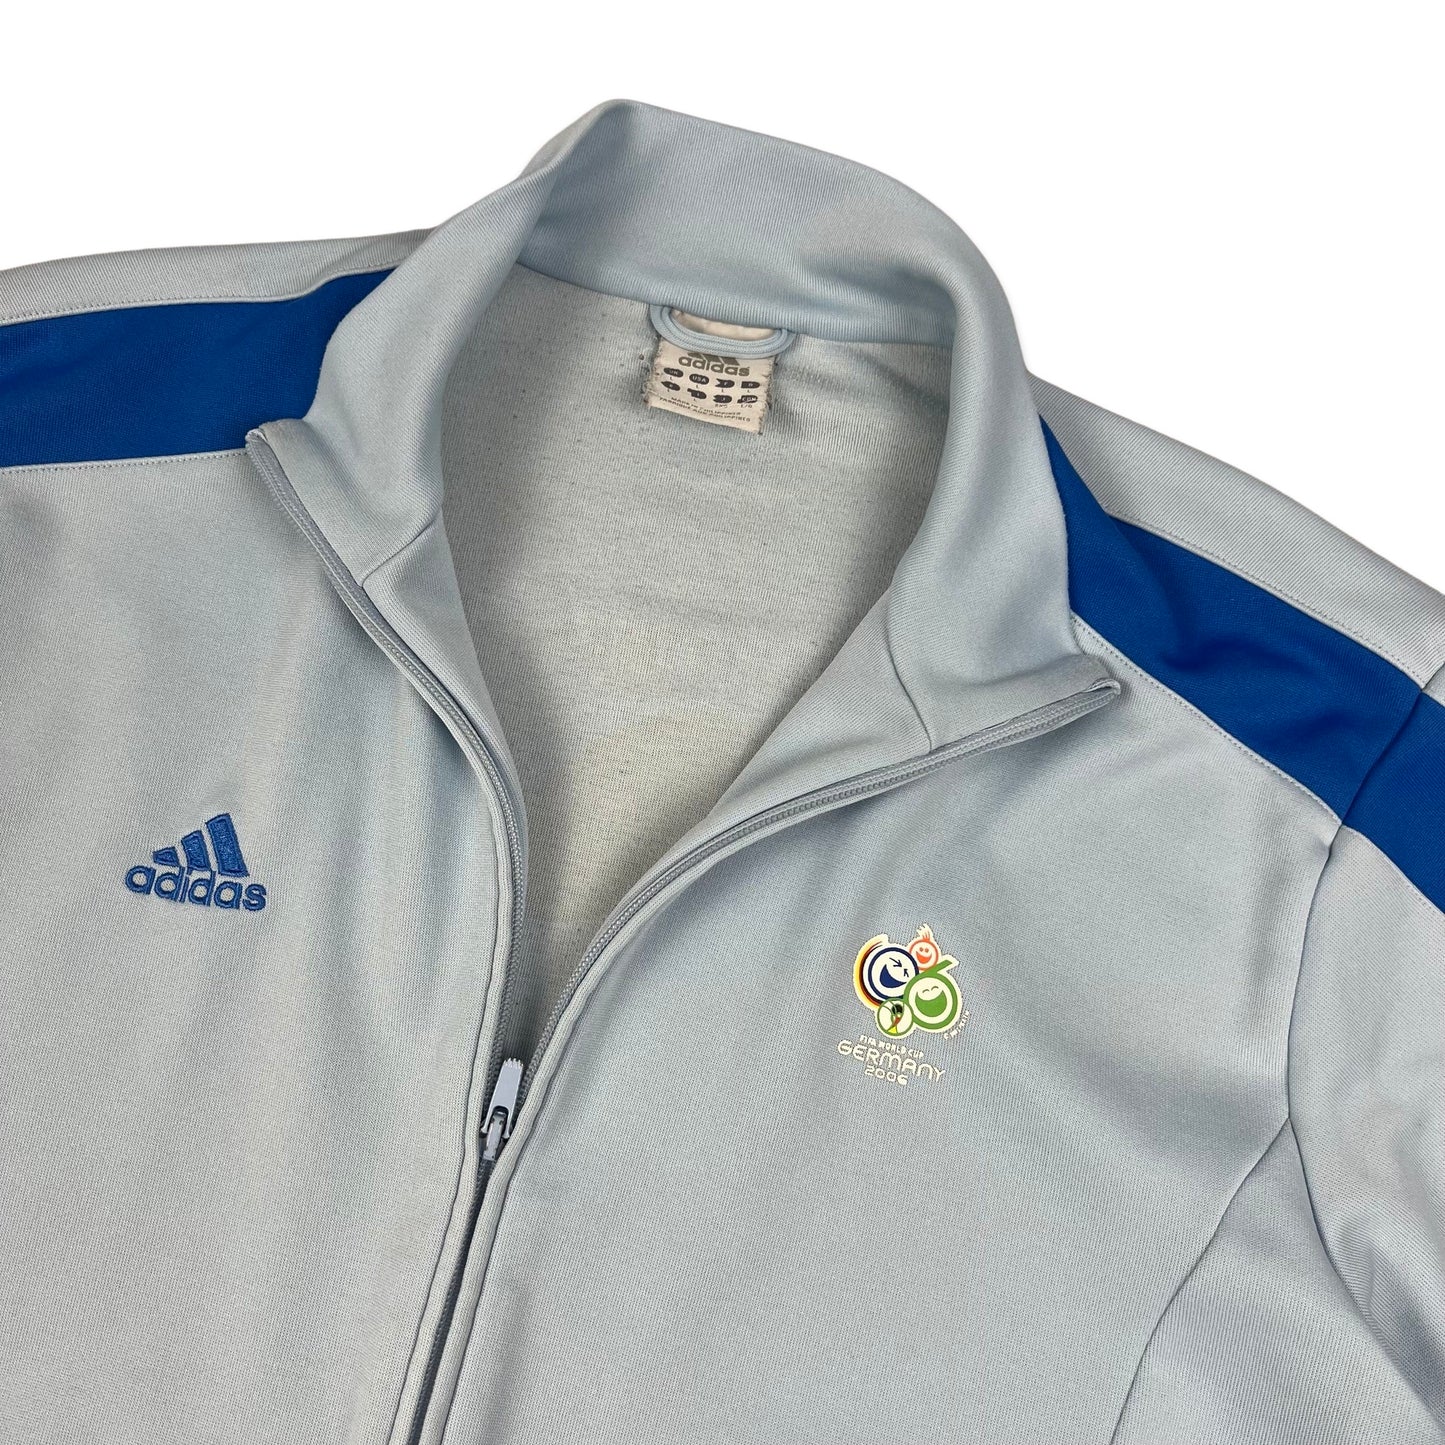 00s Adidas 2006 FIFA World Cup Blue Track Zip-up Jacket L XL